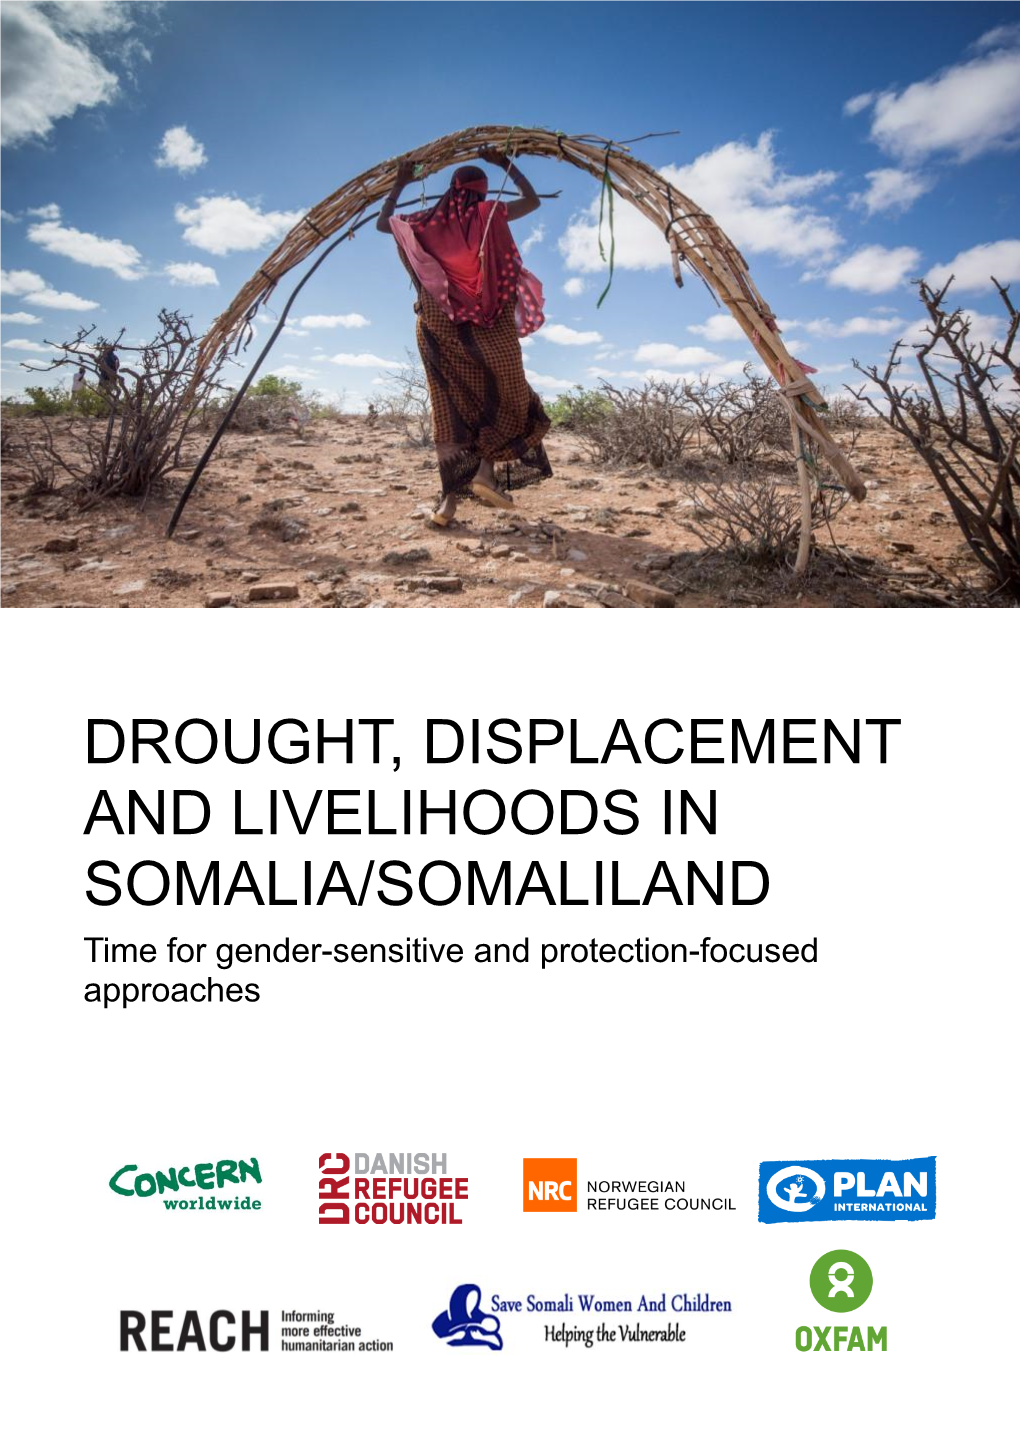 DROUGHT, DISPLACEMENT and LIVELIHOODS in SOMALIA/SOMALILAND Time for Gender-Sensitive and Protection-Focused Approaches